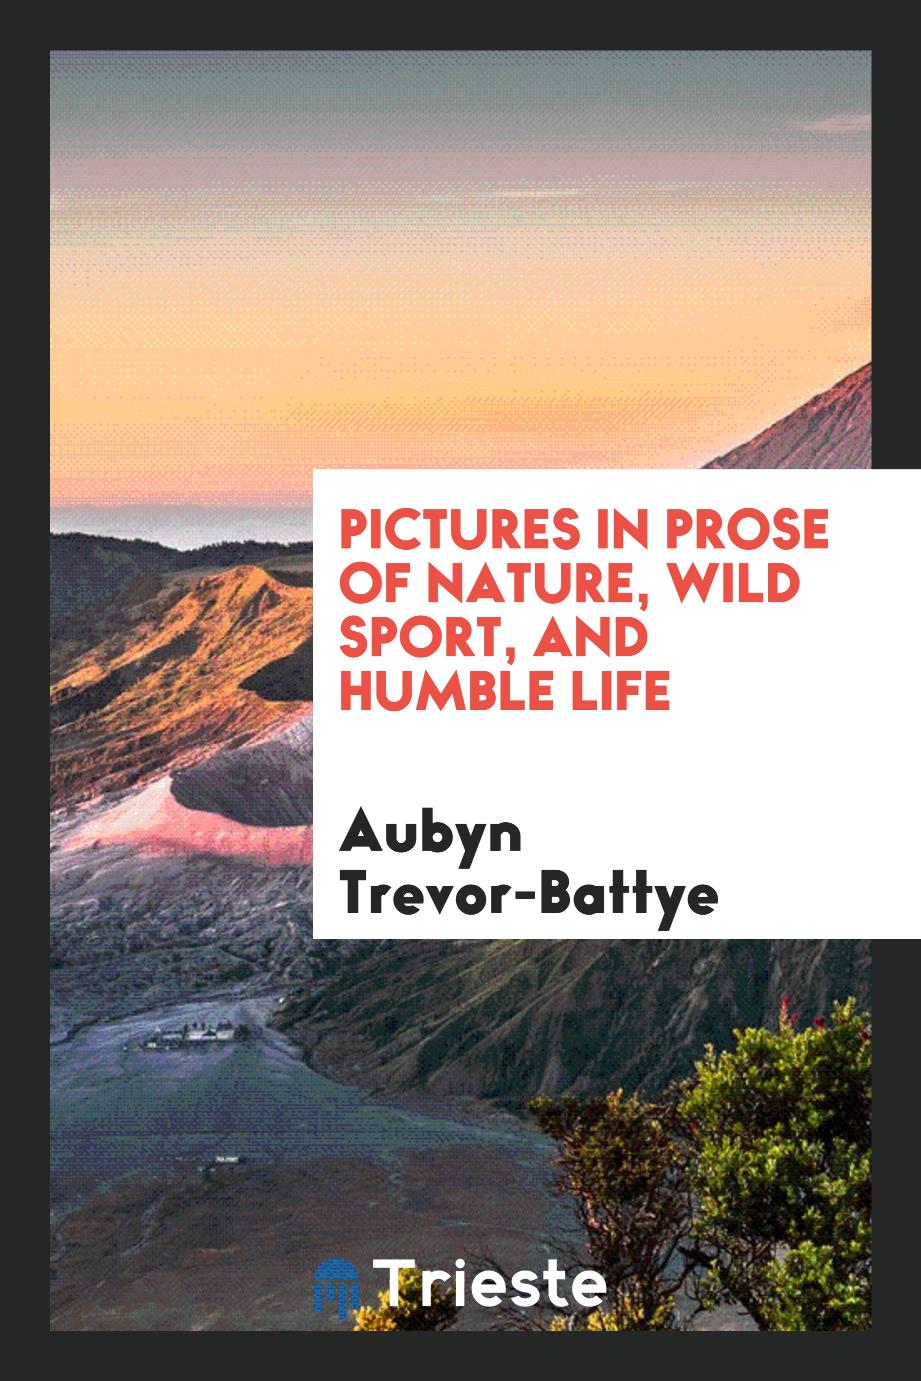 Pictures in prose of nature, wild sport, and humble life